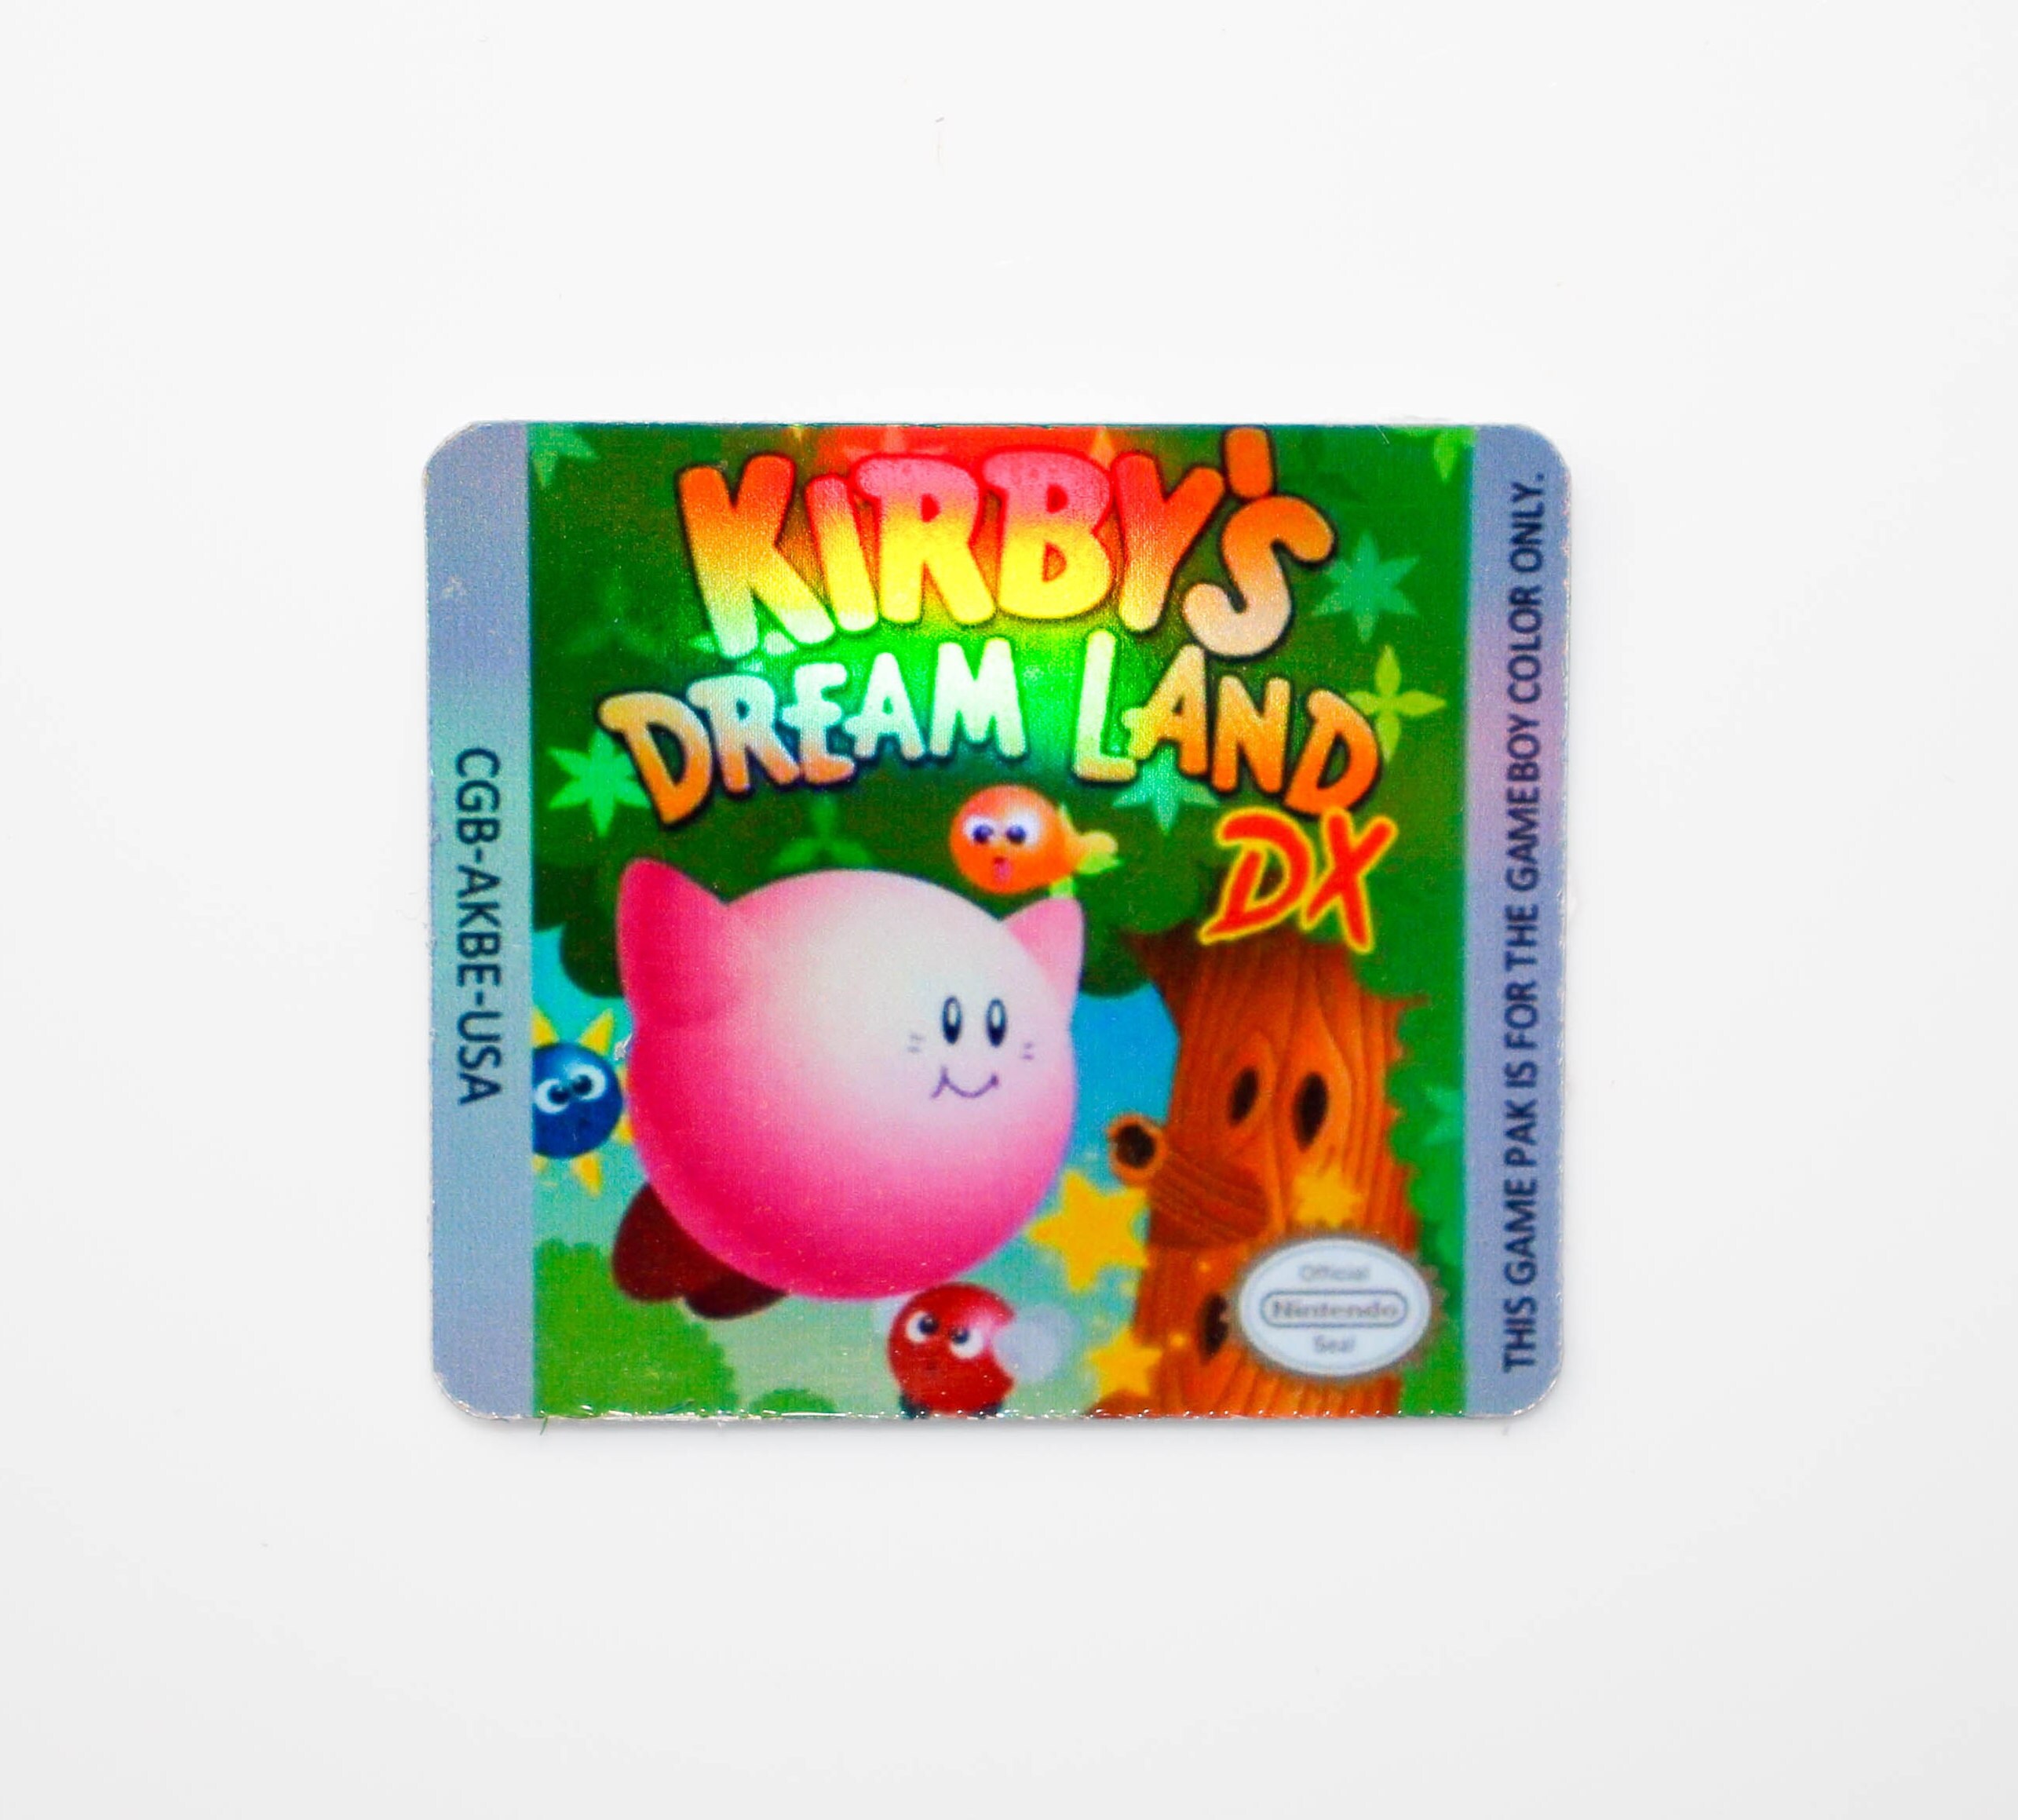 Gameboy Kirby's Dream Land DX Replacement Cartridge - Etsy Ireland